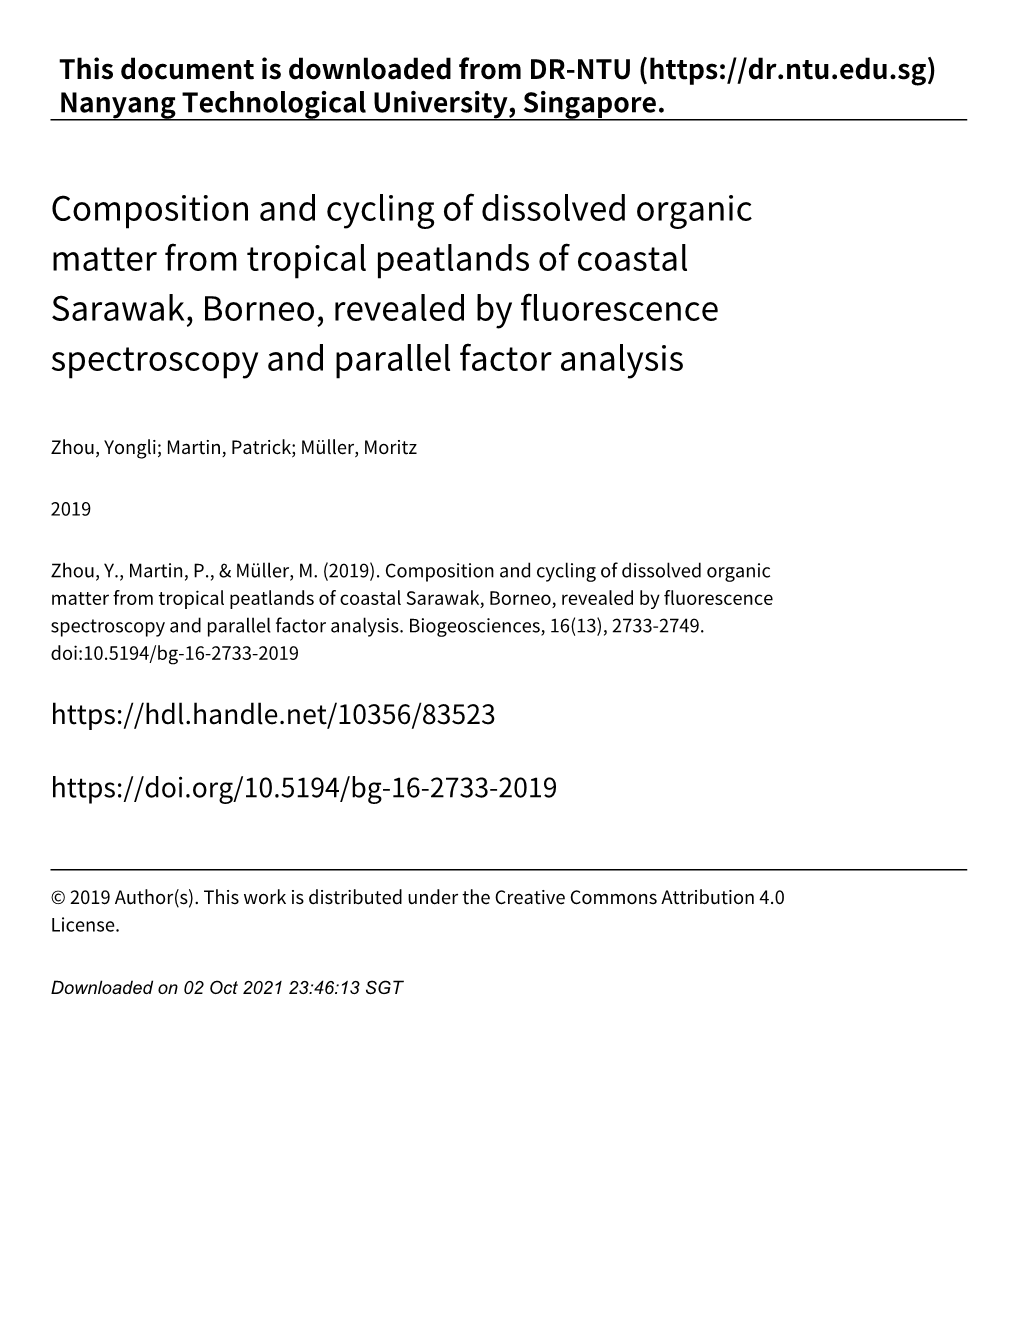 Composition and Cycling of Dissolved Organic Matter from Tropical